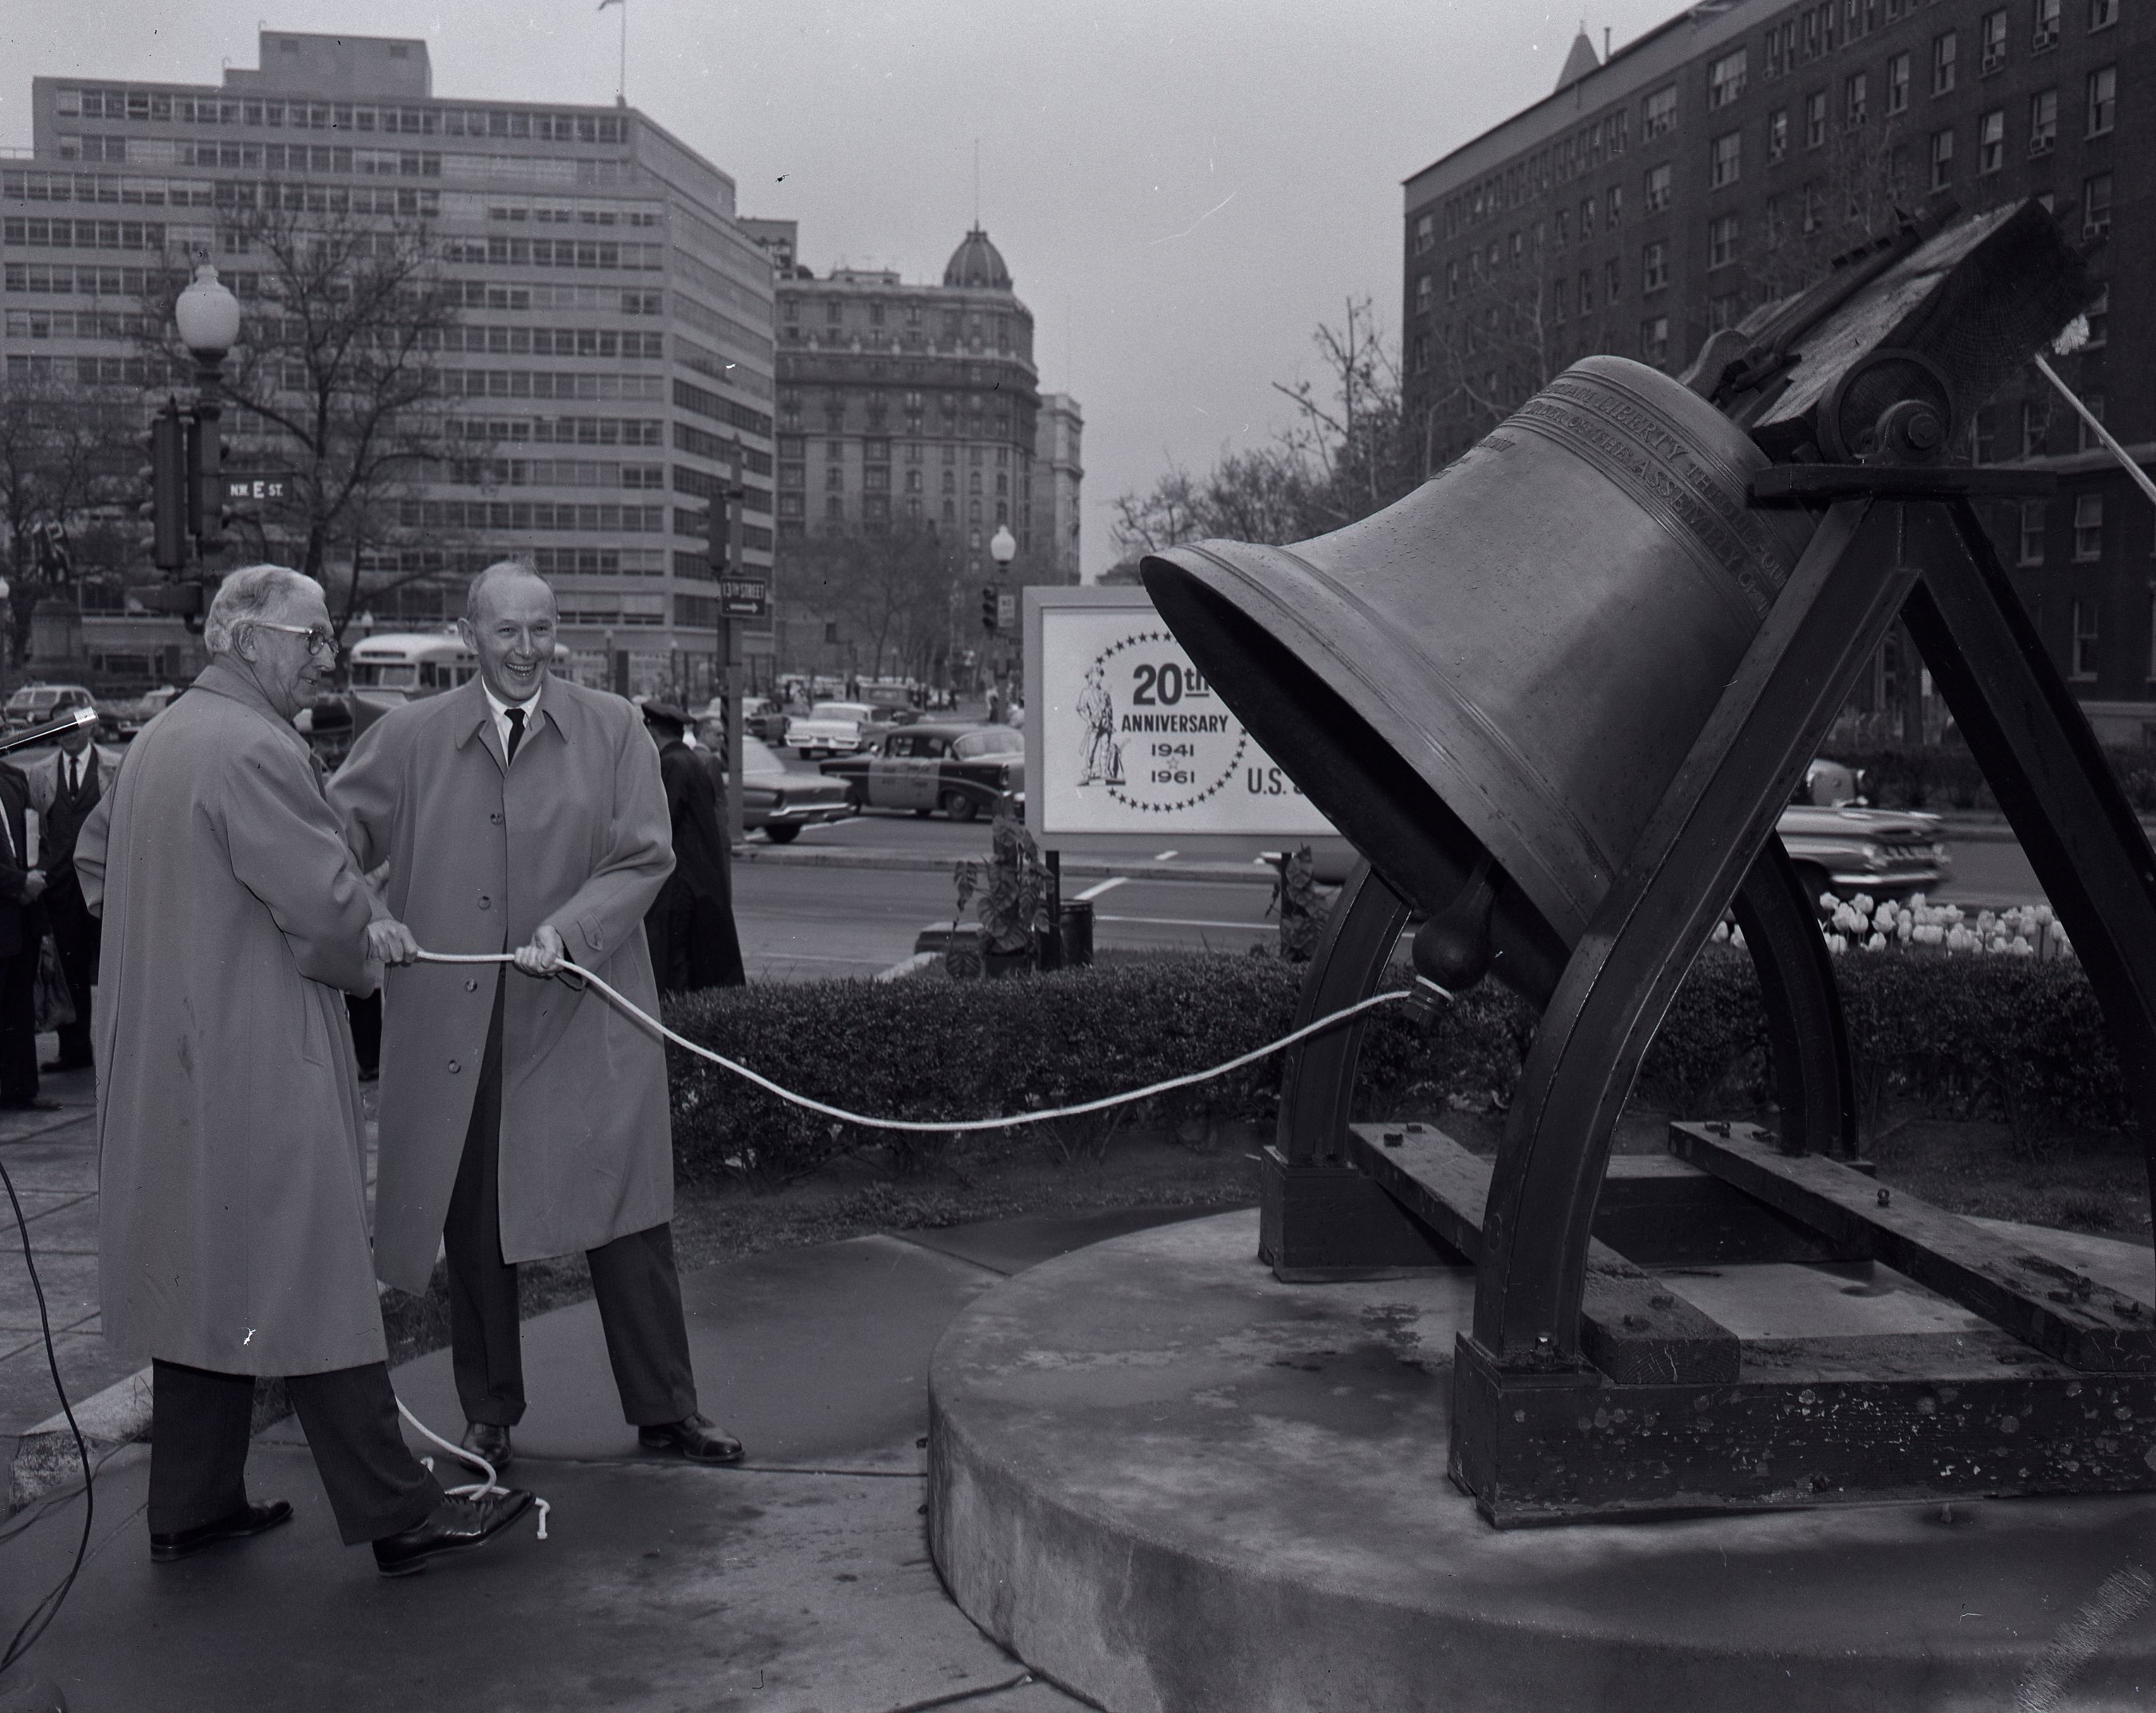 National Treasury: the case of DC’s missing Liberty Bell